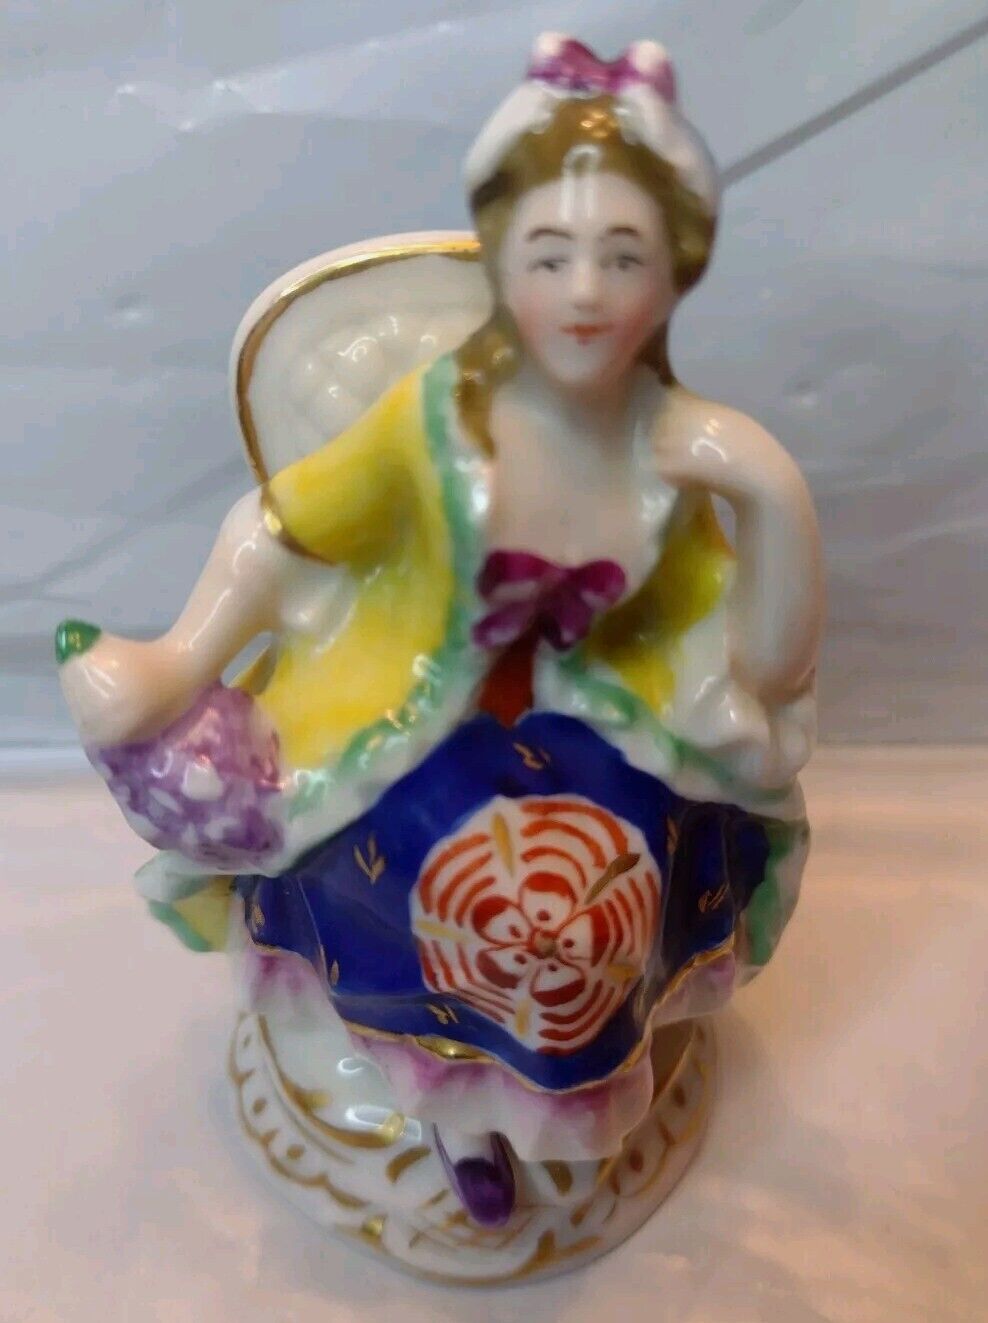 Vintage Porcelain Victorian Woman Figurine  Made In Germany 3” Tall Gold Trim